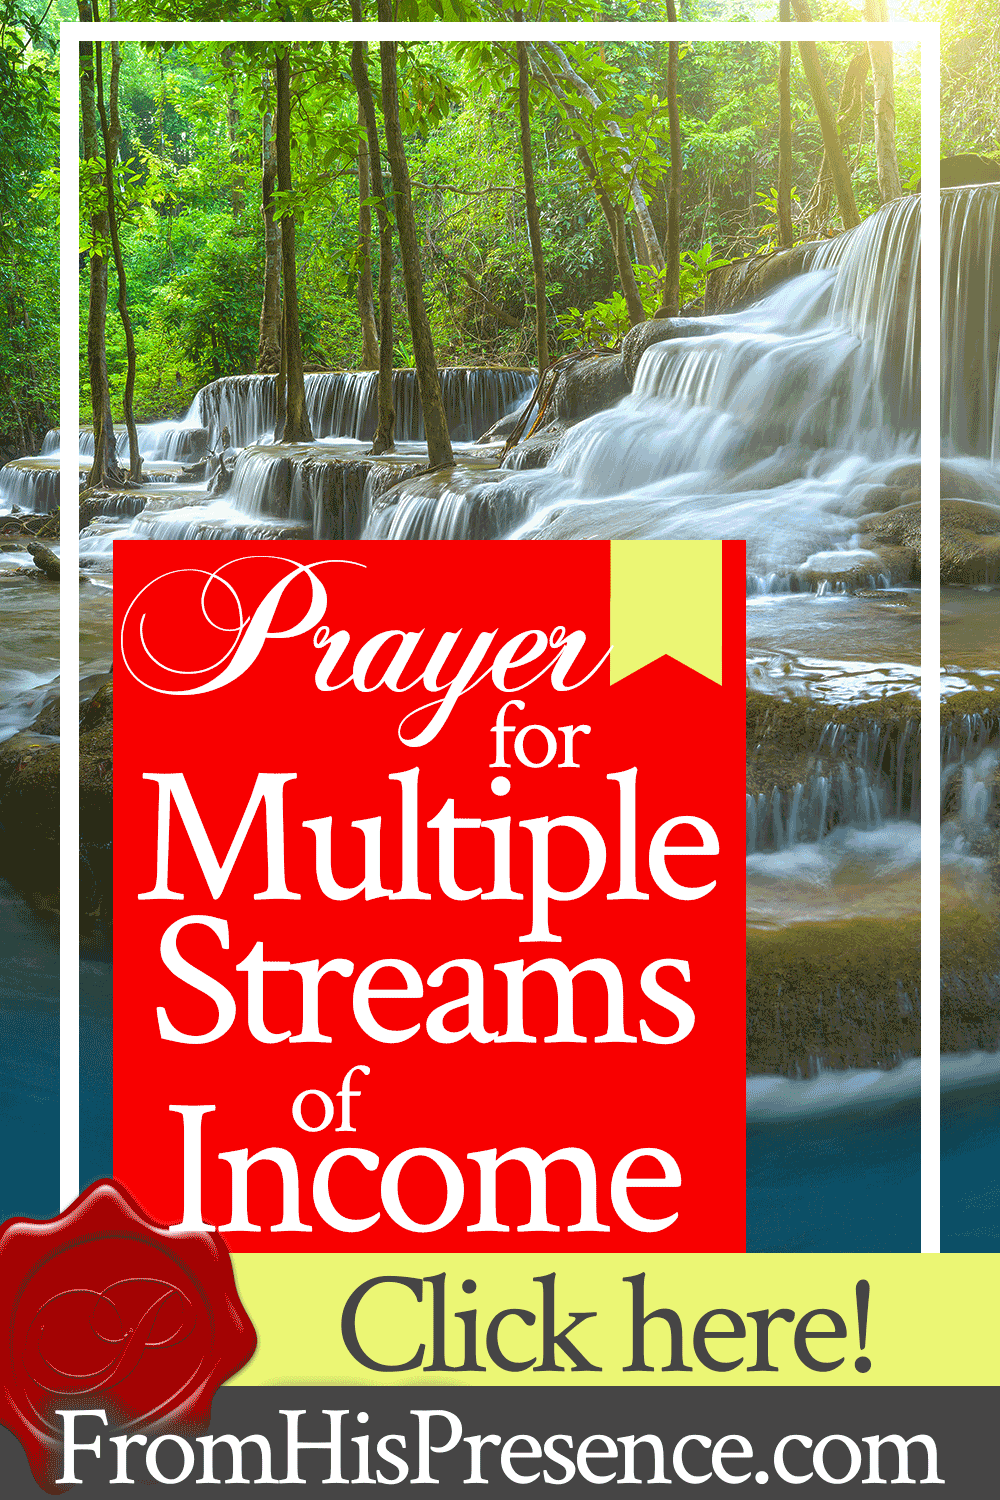 Prayer for Multiple Streams of Income | by Jamie Rohrbaugh | FromHisPresence.com